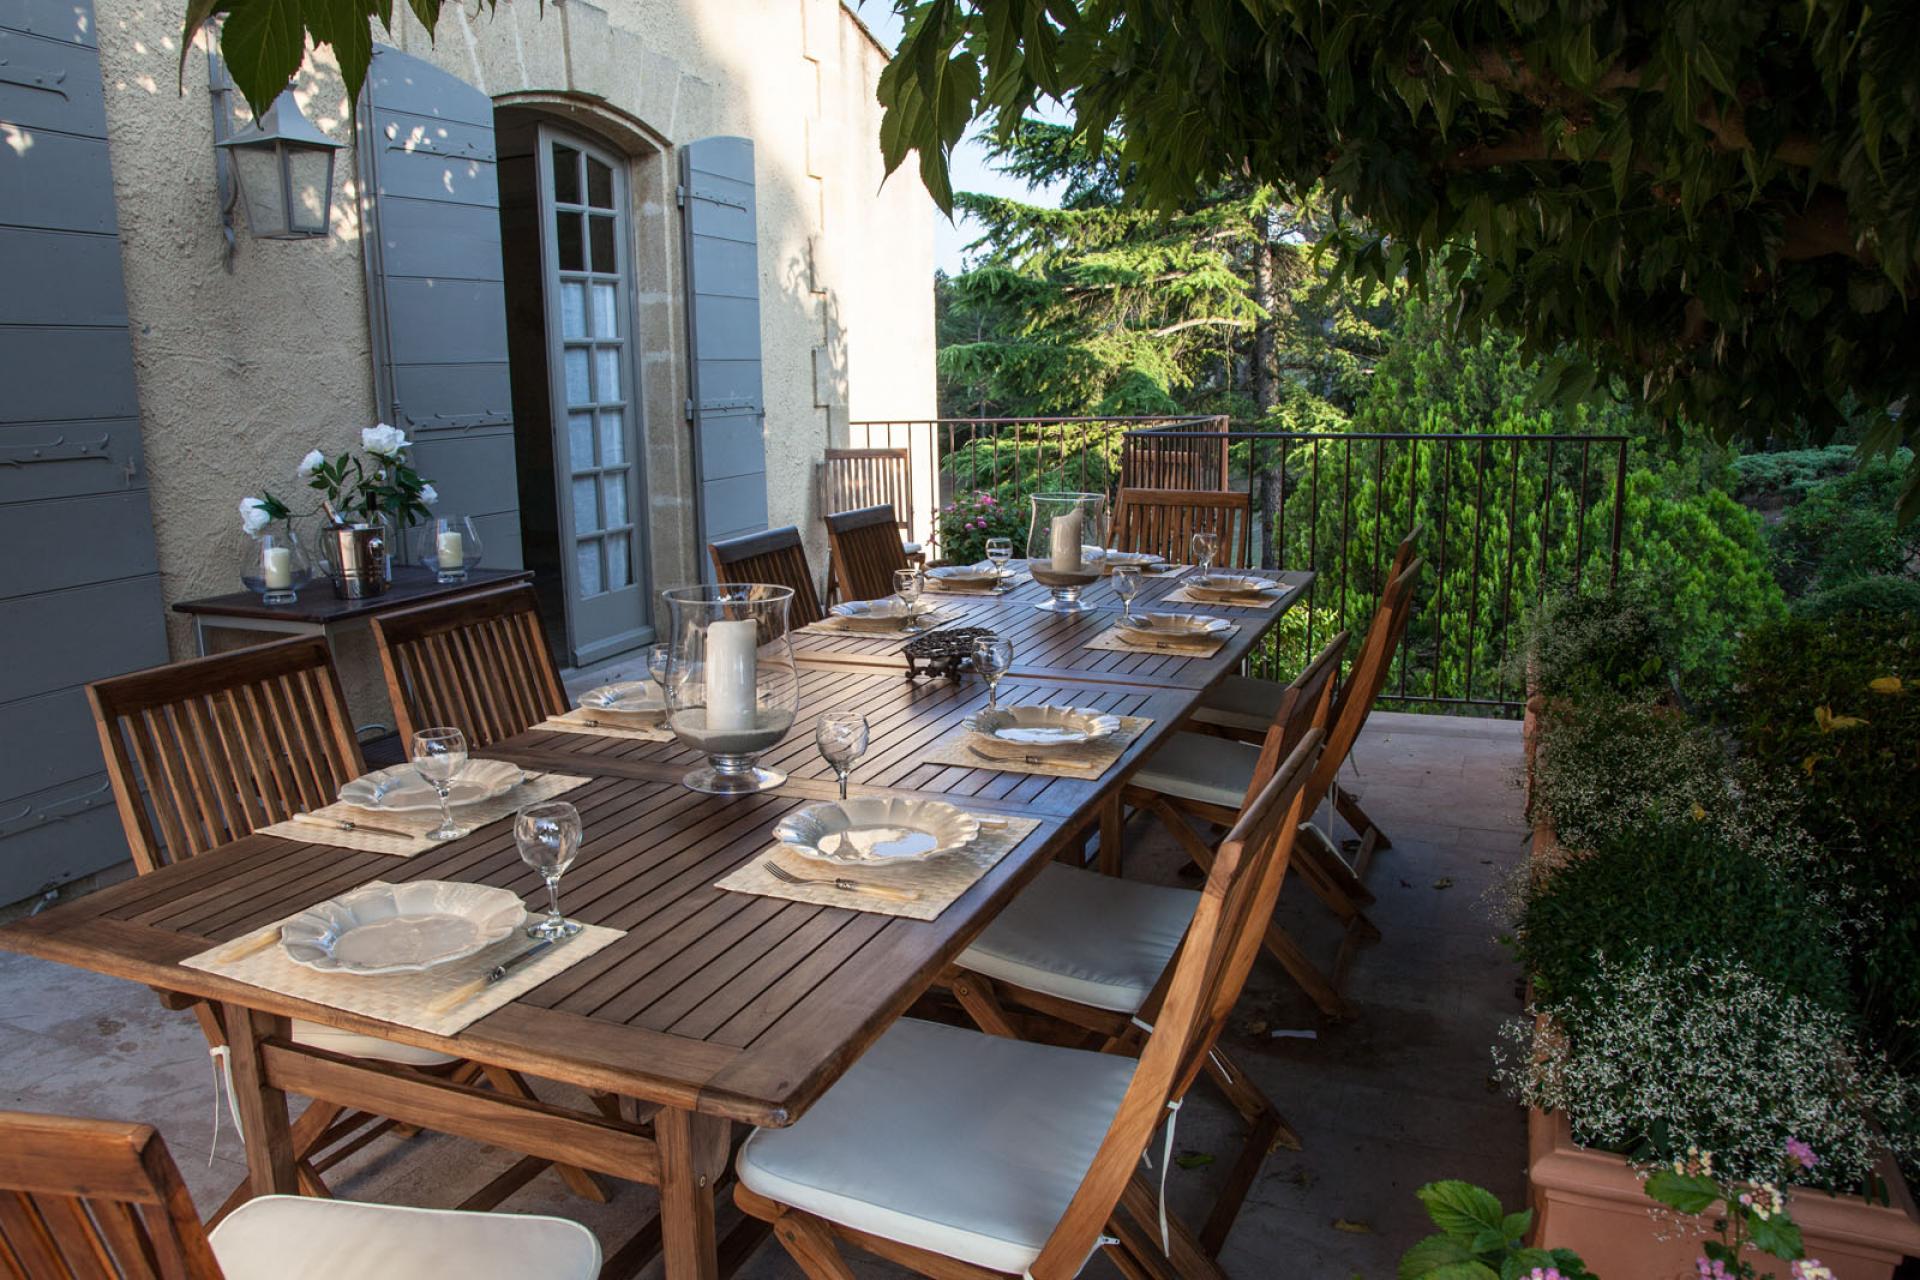 The nice outside dining area in Chateau de la Tour